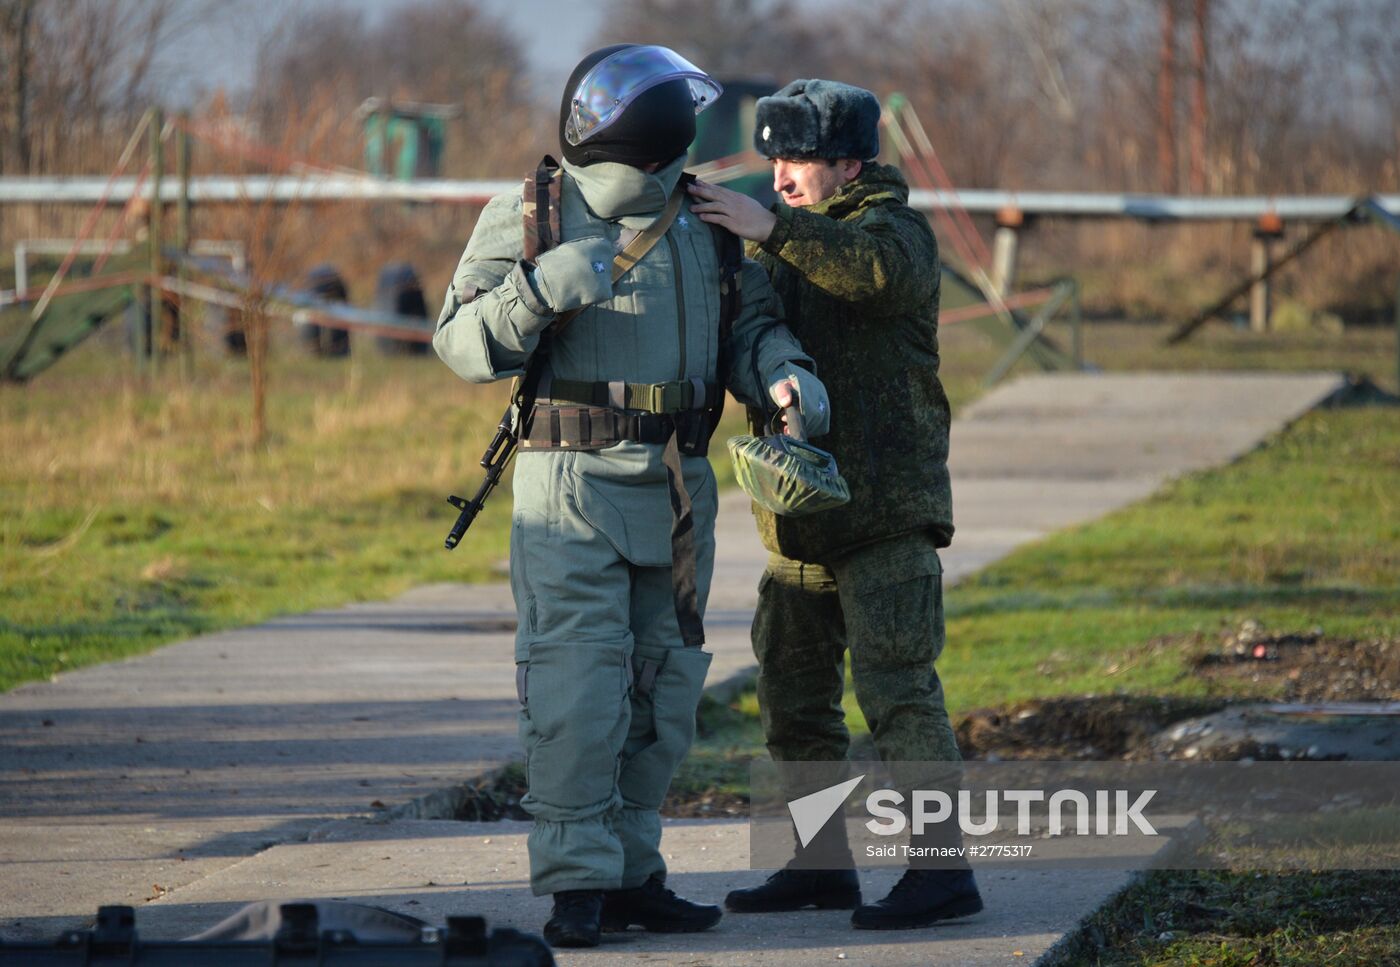 Combat engineer units exercise in Russian cities